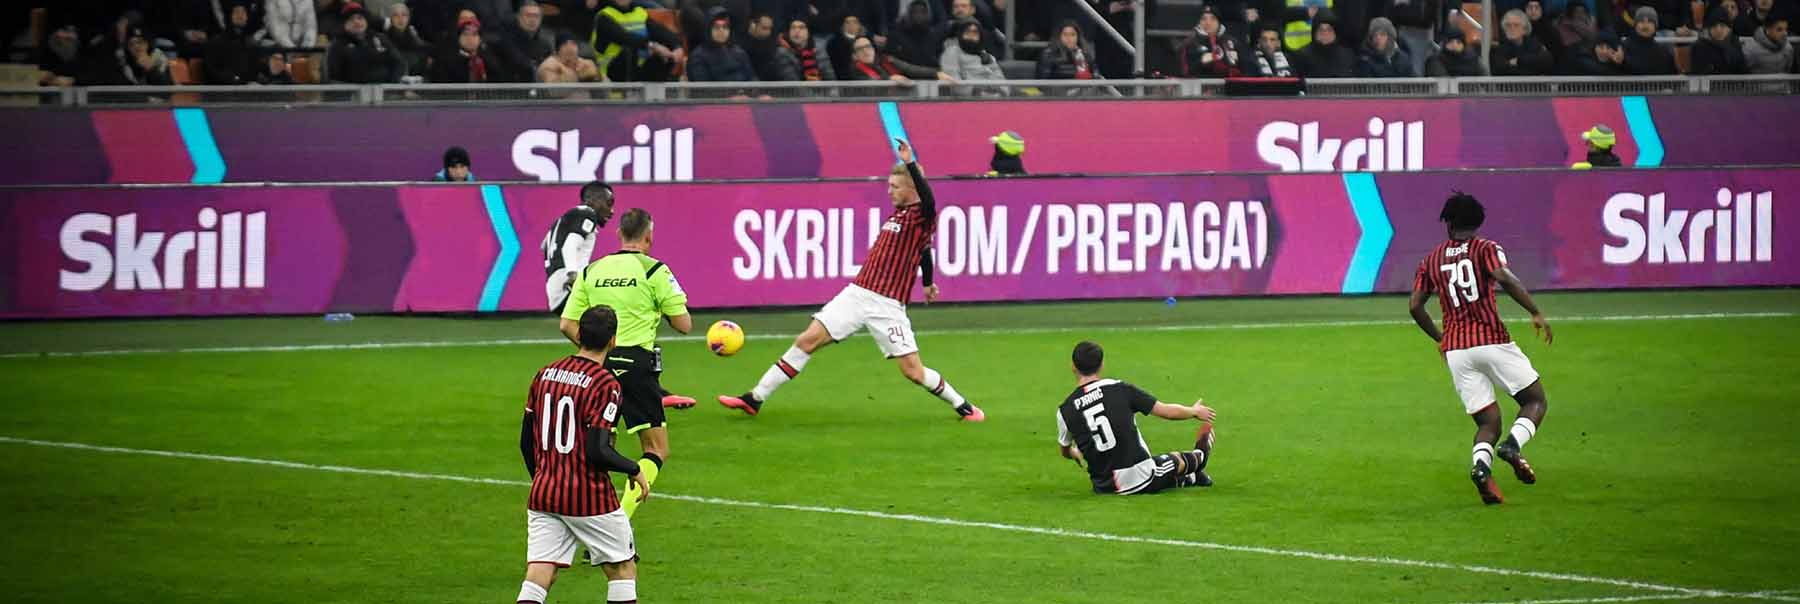 AC Milan playing on the field; Skrill ads in the background